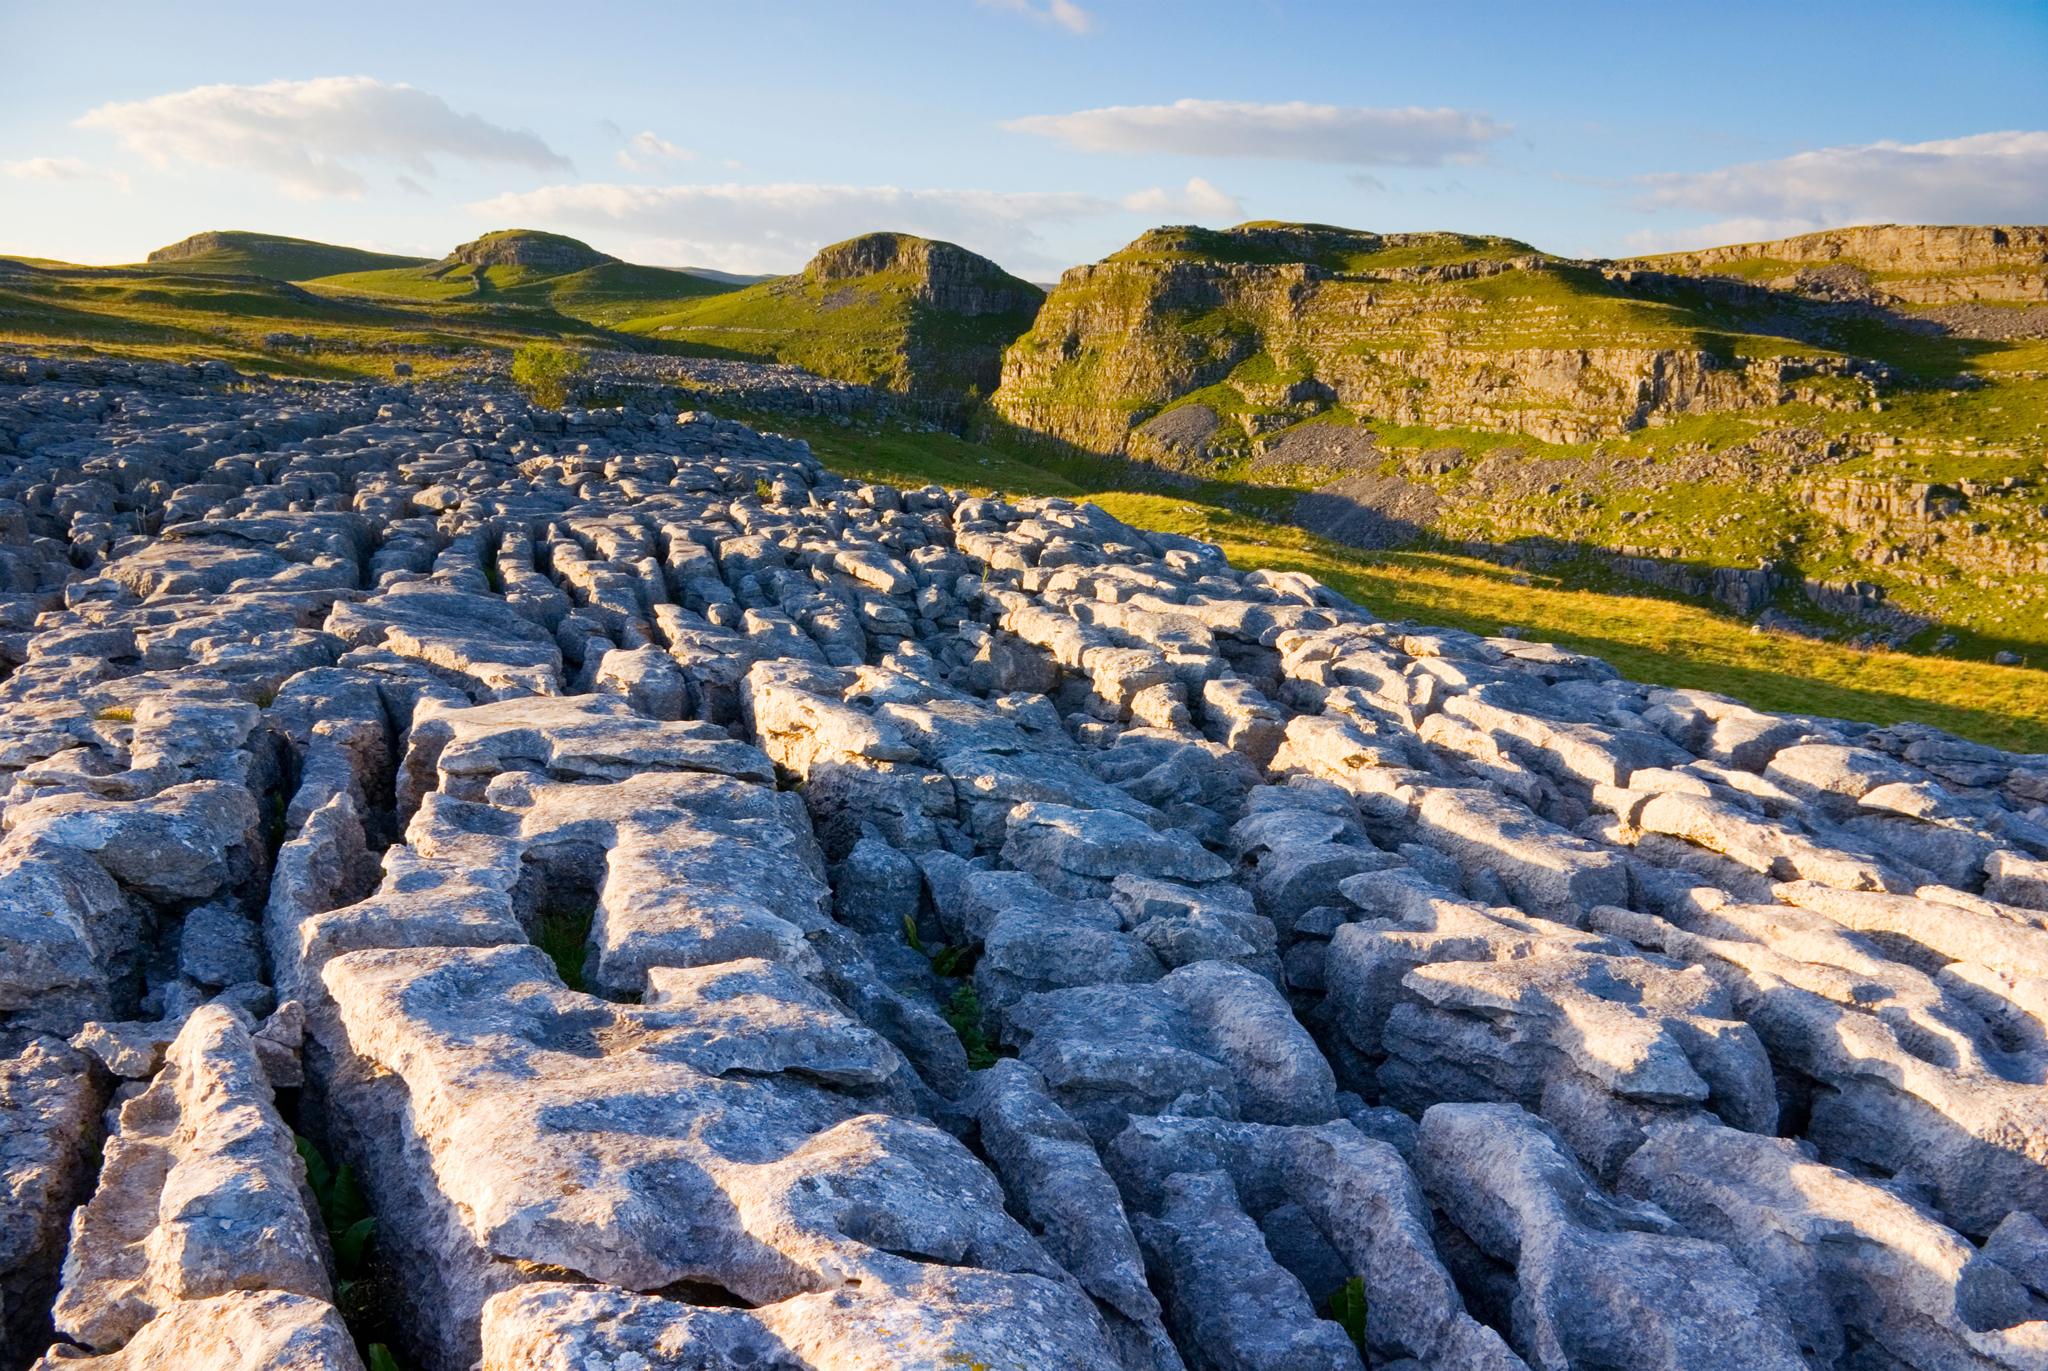 Malham Cove, in Yorkshire Dales National Park